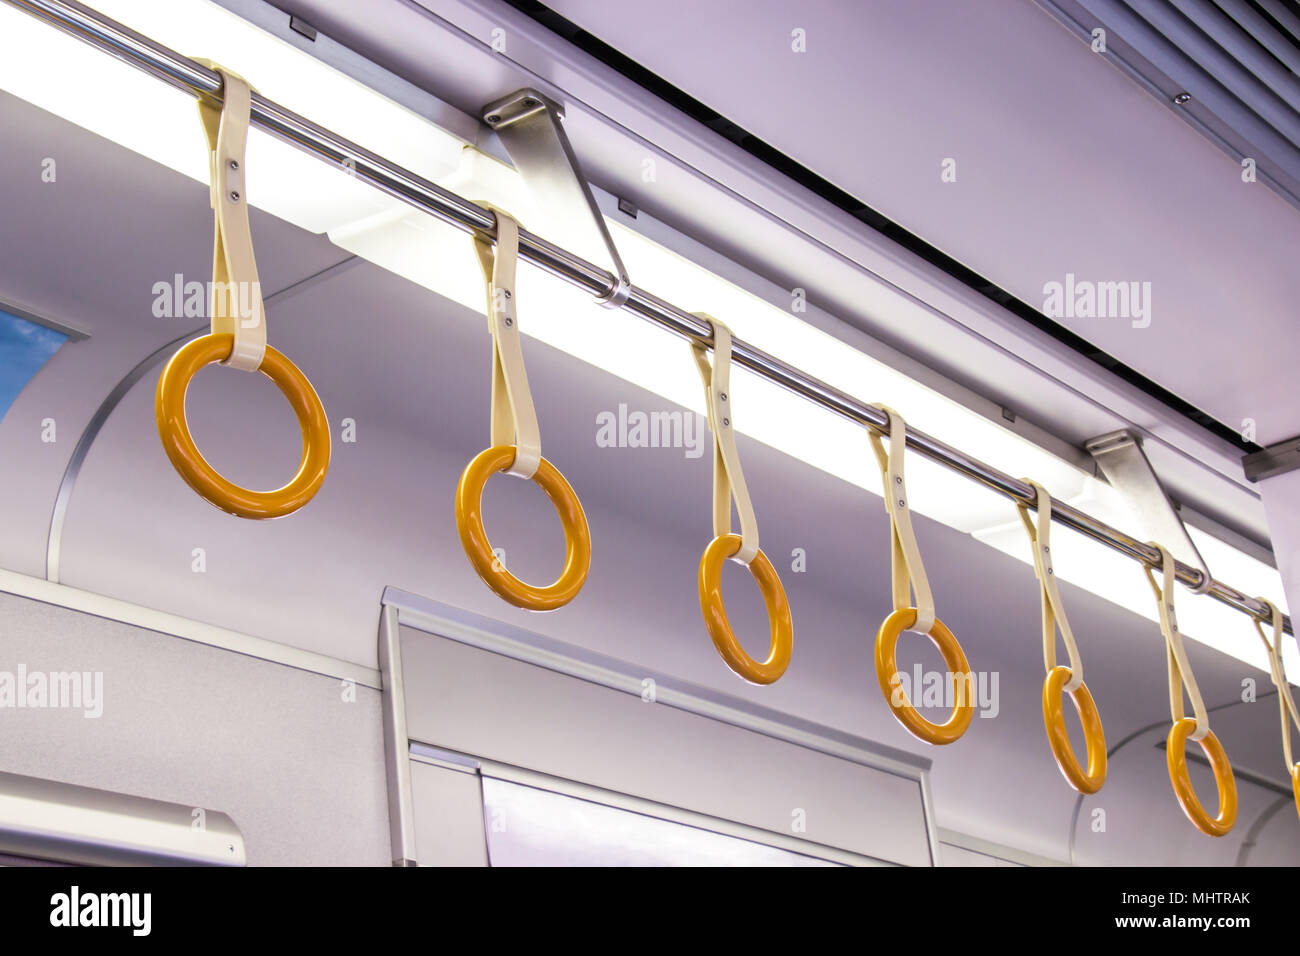 The handle on on ceiling of sky train, underground railway system or tram for safety in Japan. Stock Photo